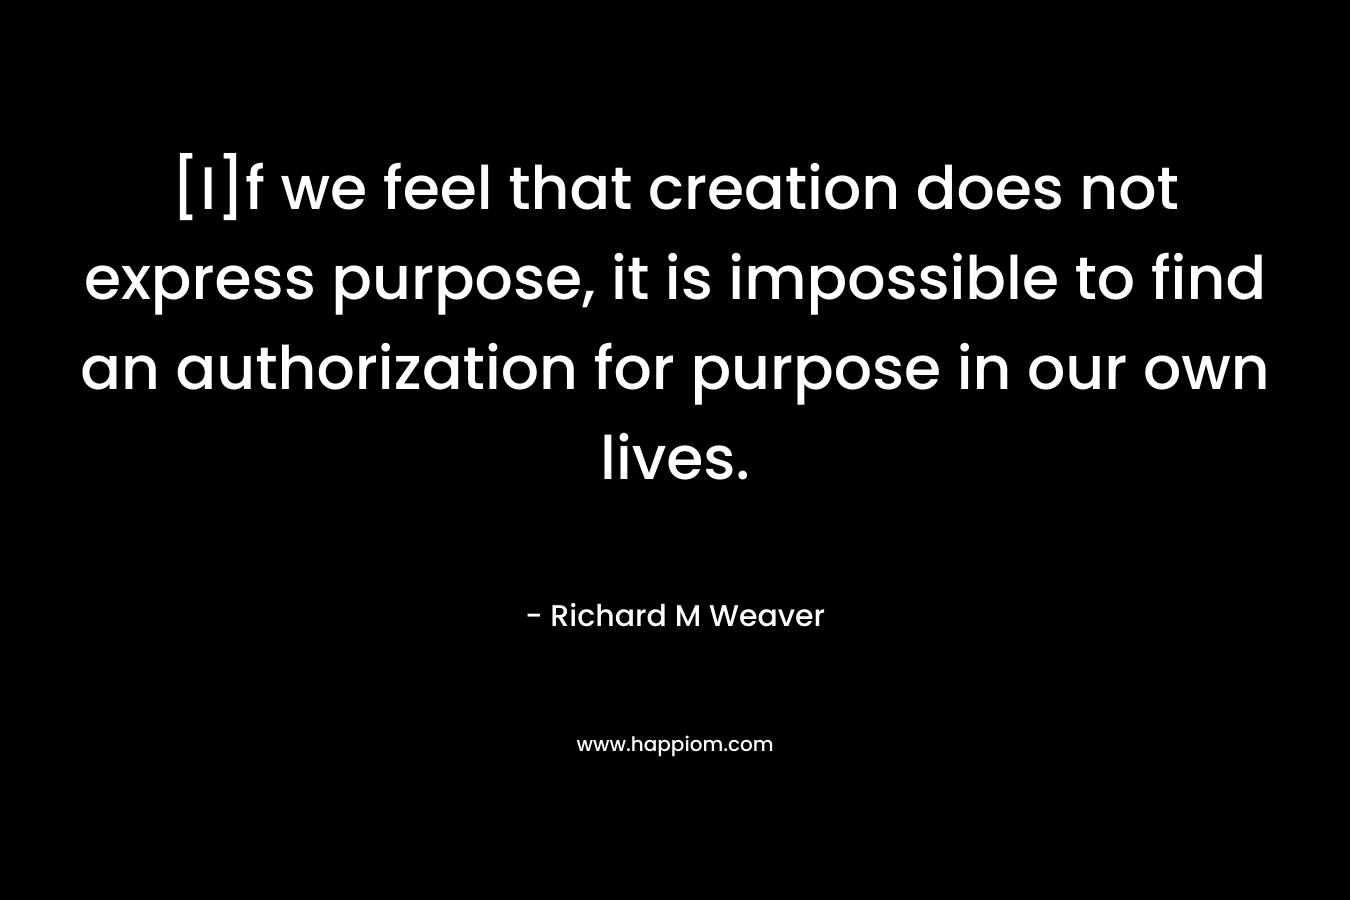 [I]f we feel that creation does not express purpose, it is impossible to find an authorization for purpose in our own lives.